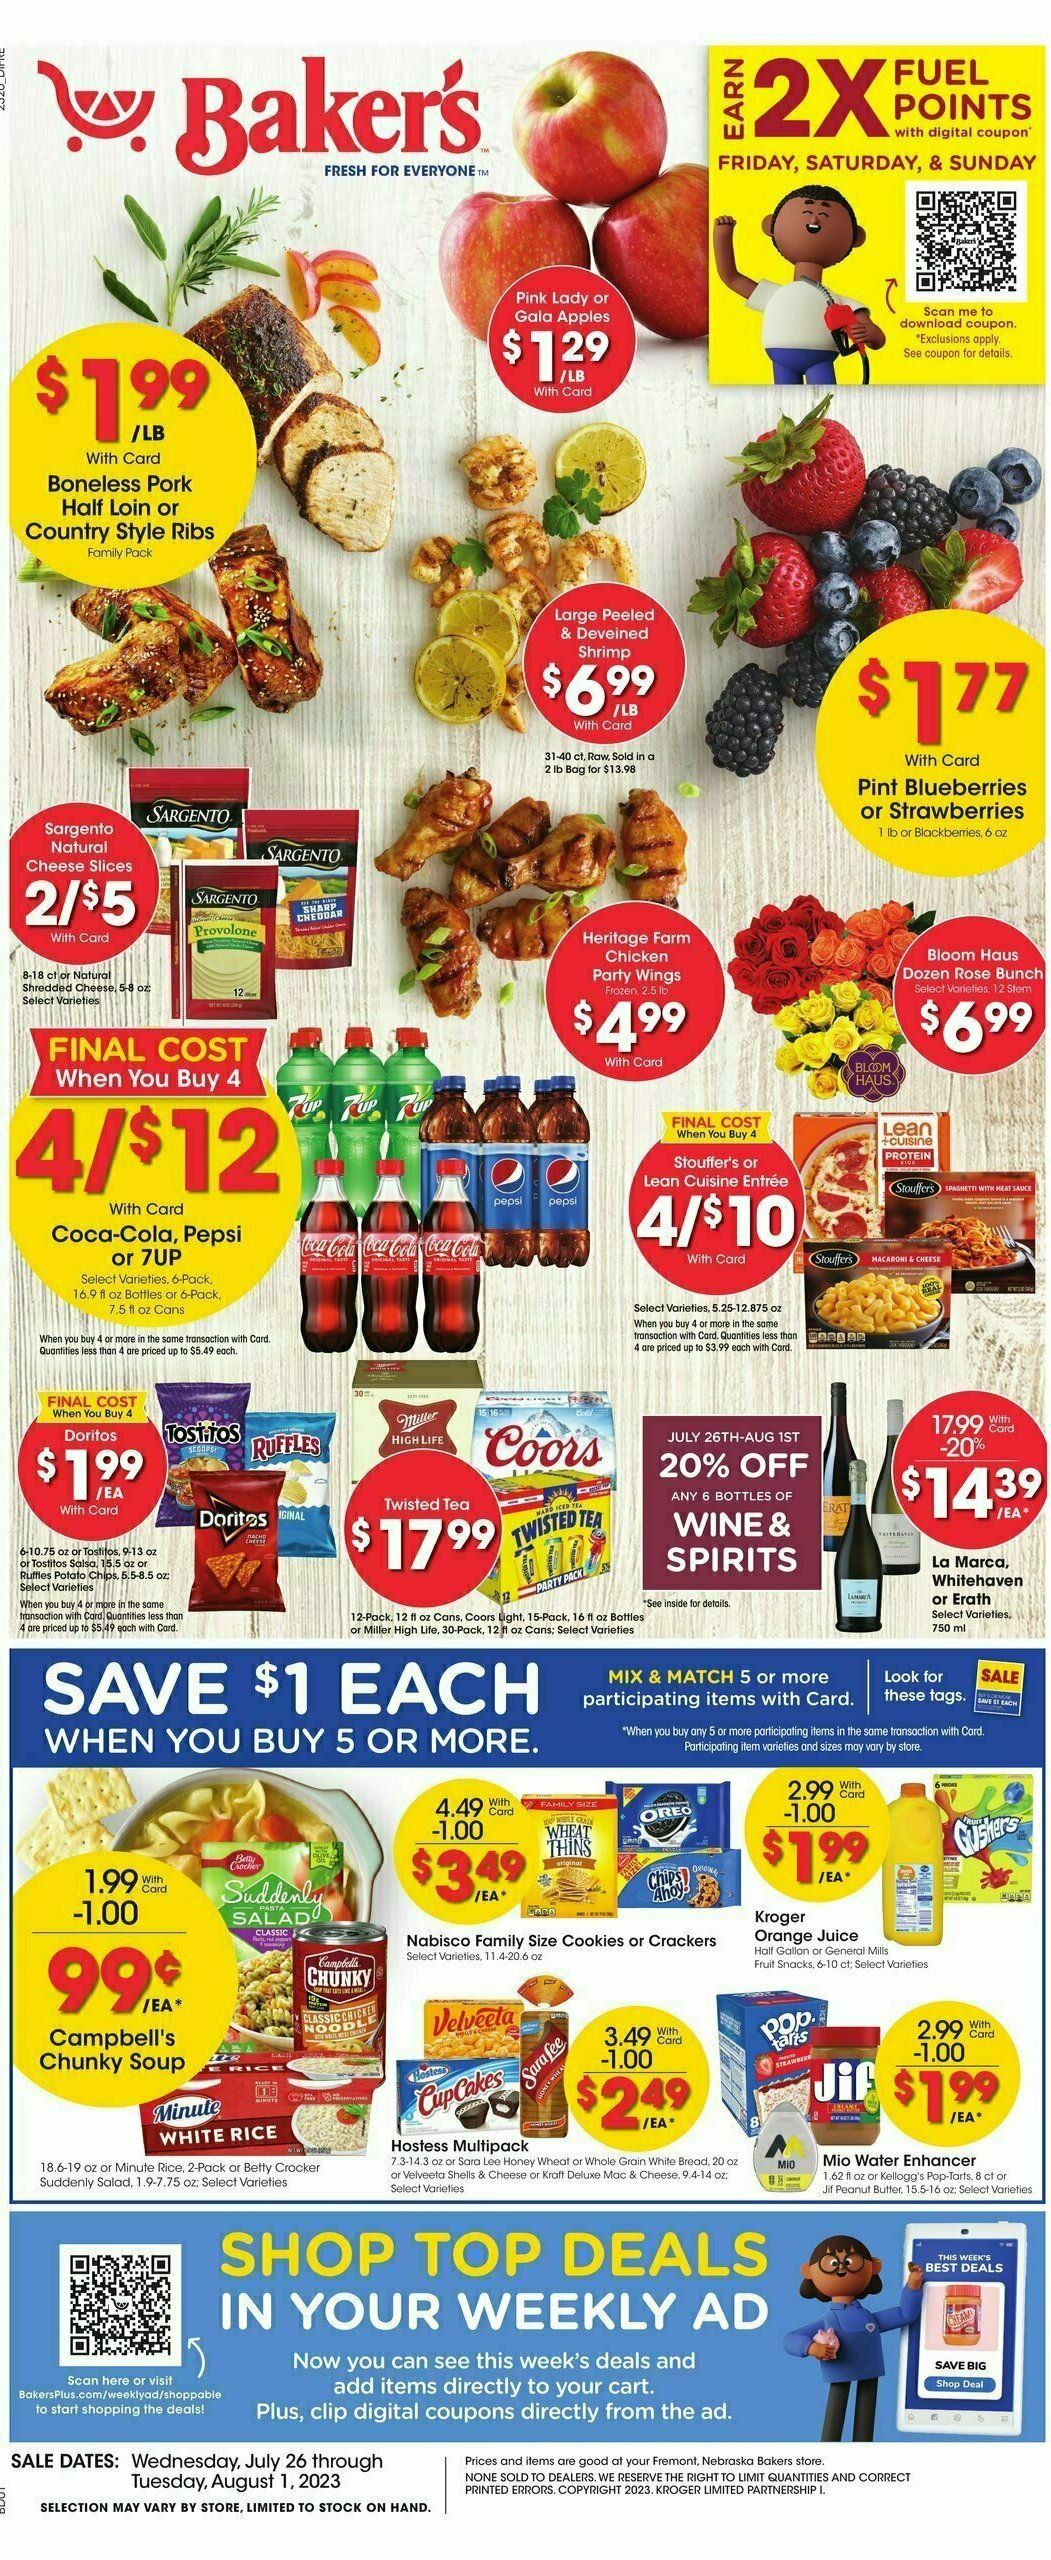 Baker's Weekly Ad from July 26